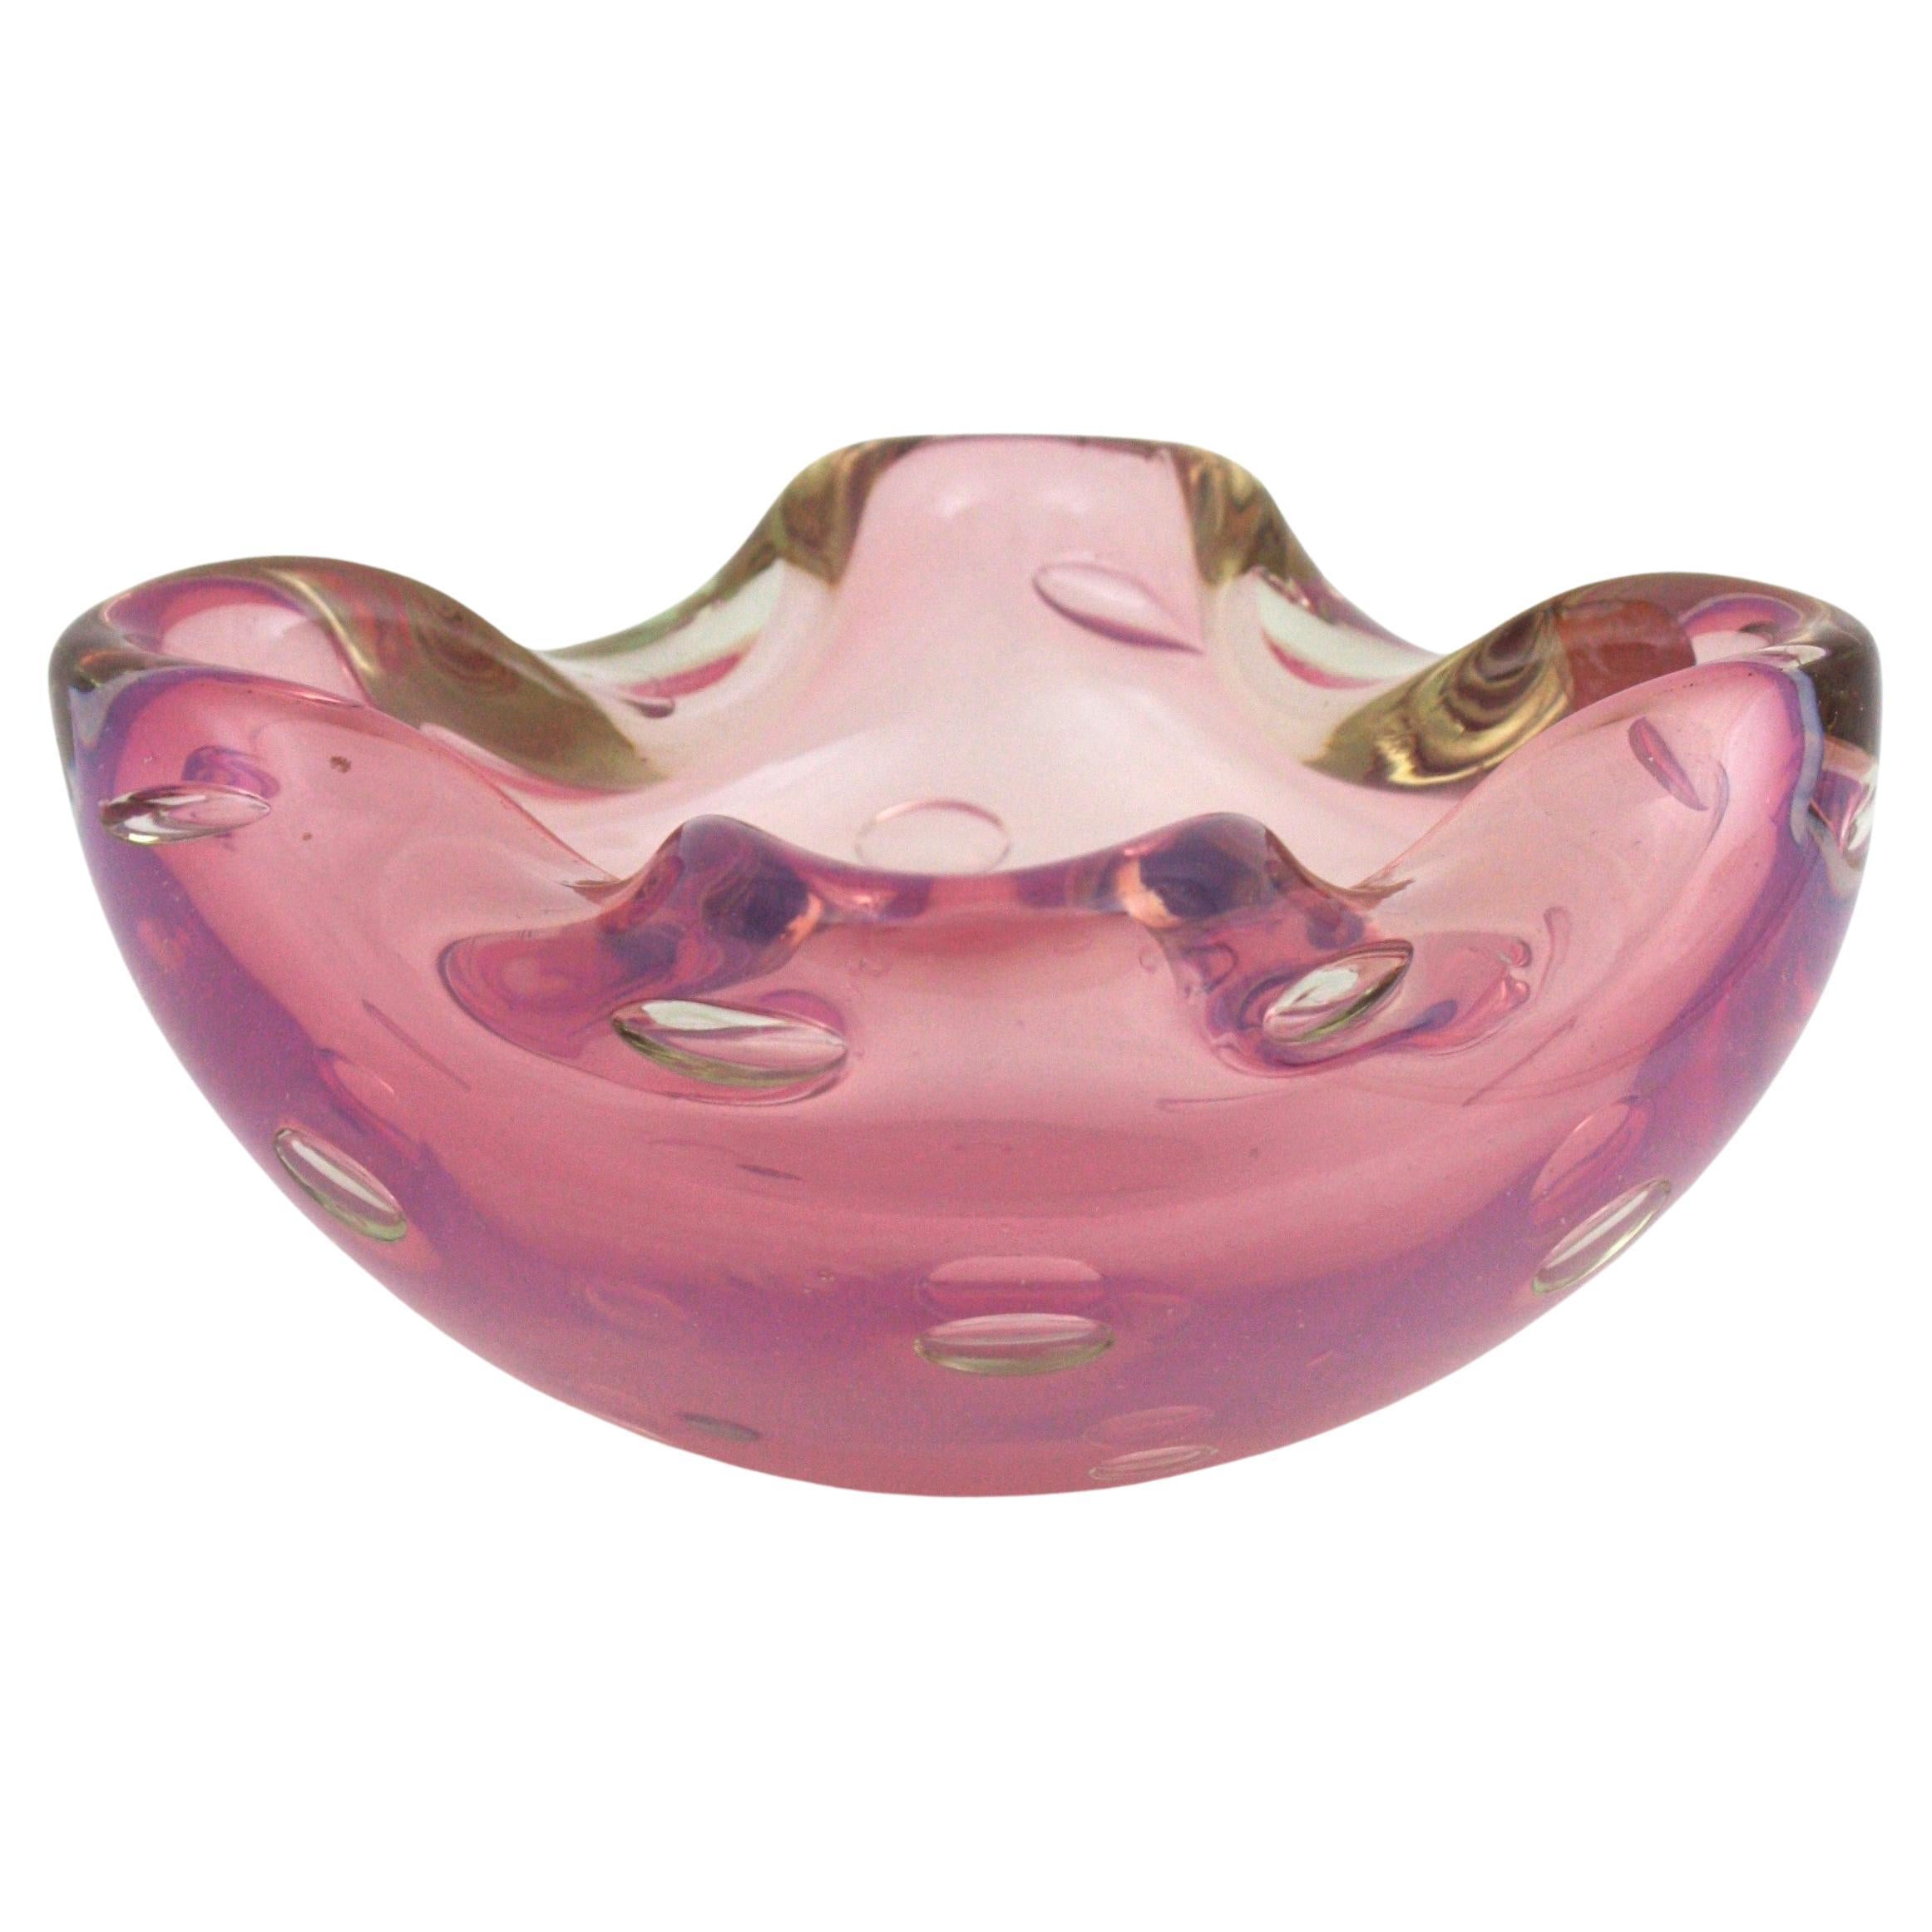 Massive hand blown Murano Sommerso pink and opalescent white glass flower bowl with folded rim. 
Manufactured By Archimede Seguso and Seguso Factory, Italy, 1950s.
Iridiscent pink glass and giant inner air bubbles. Sommerso and Bullicante glass